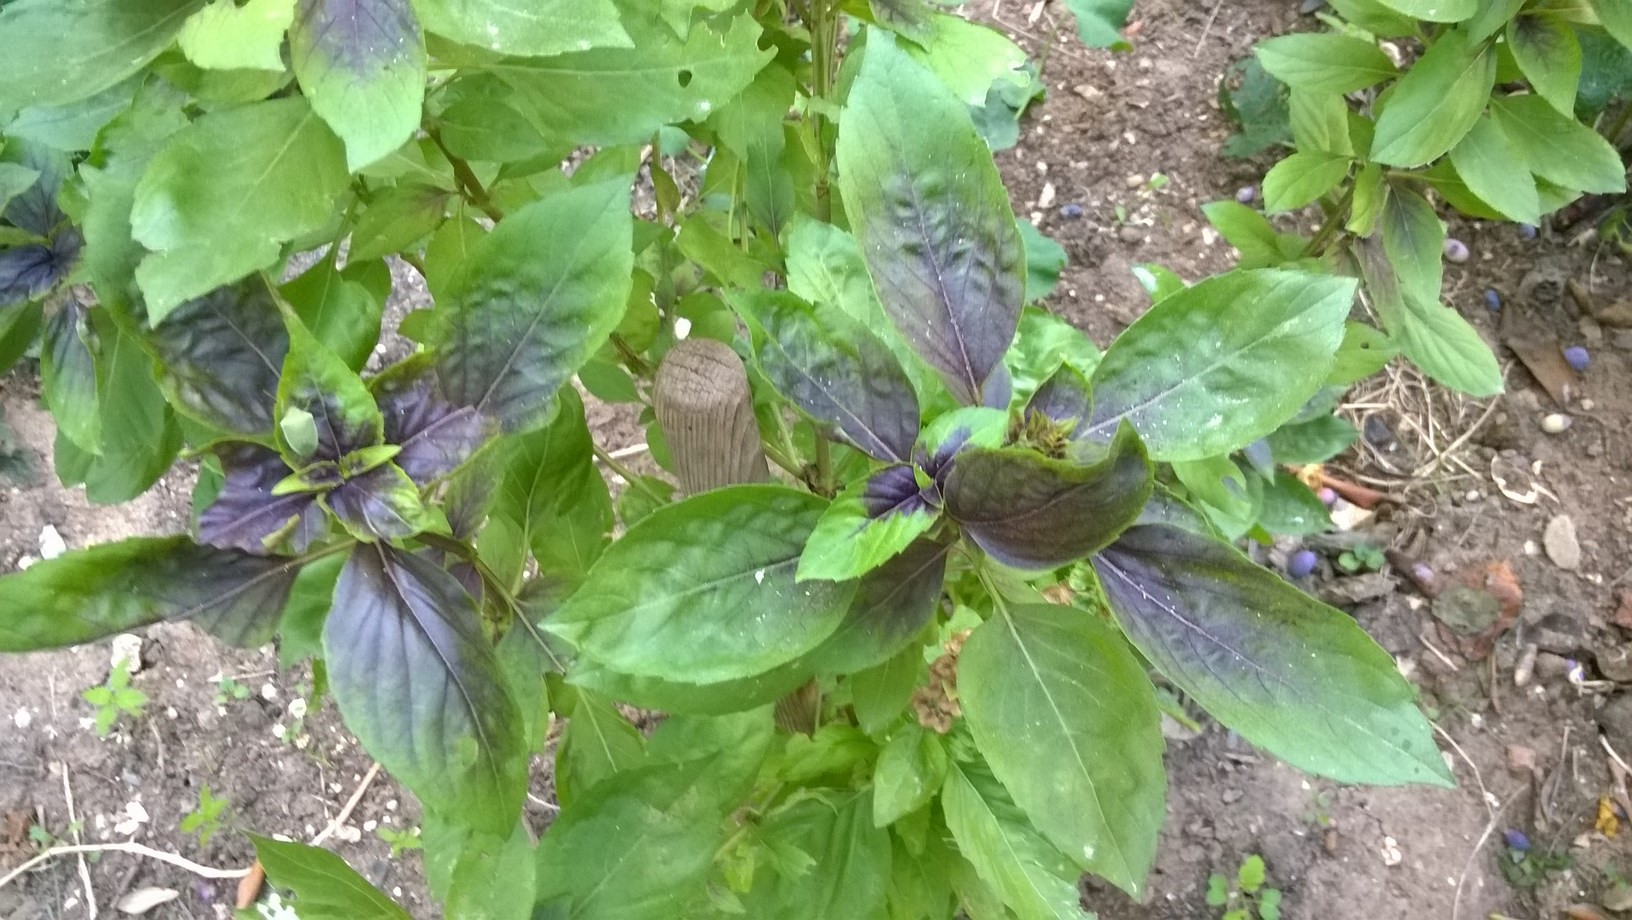 For the best harvest, give basil plants full sun, ample water, and regular pruning.